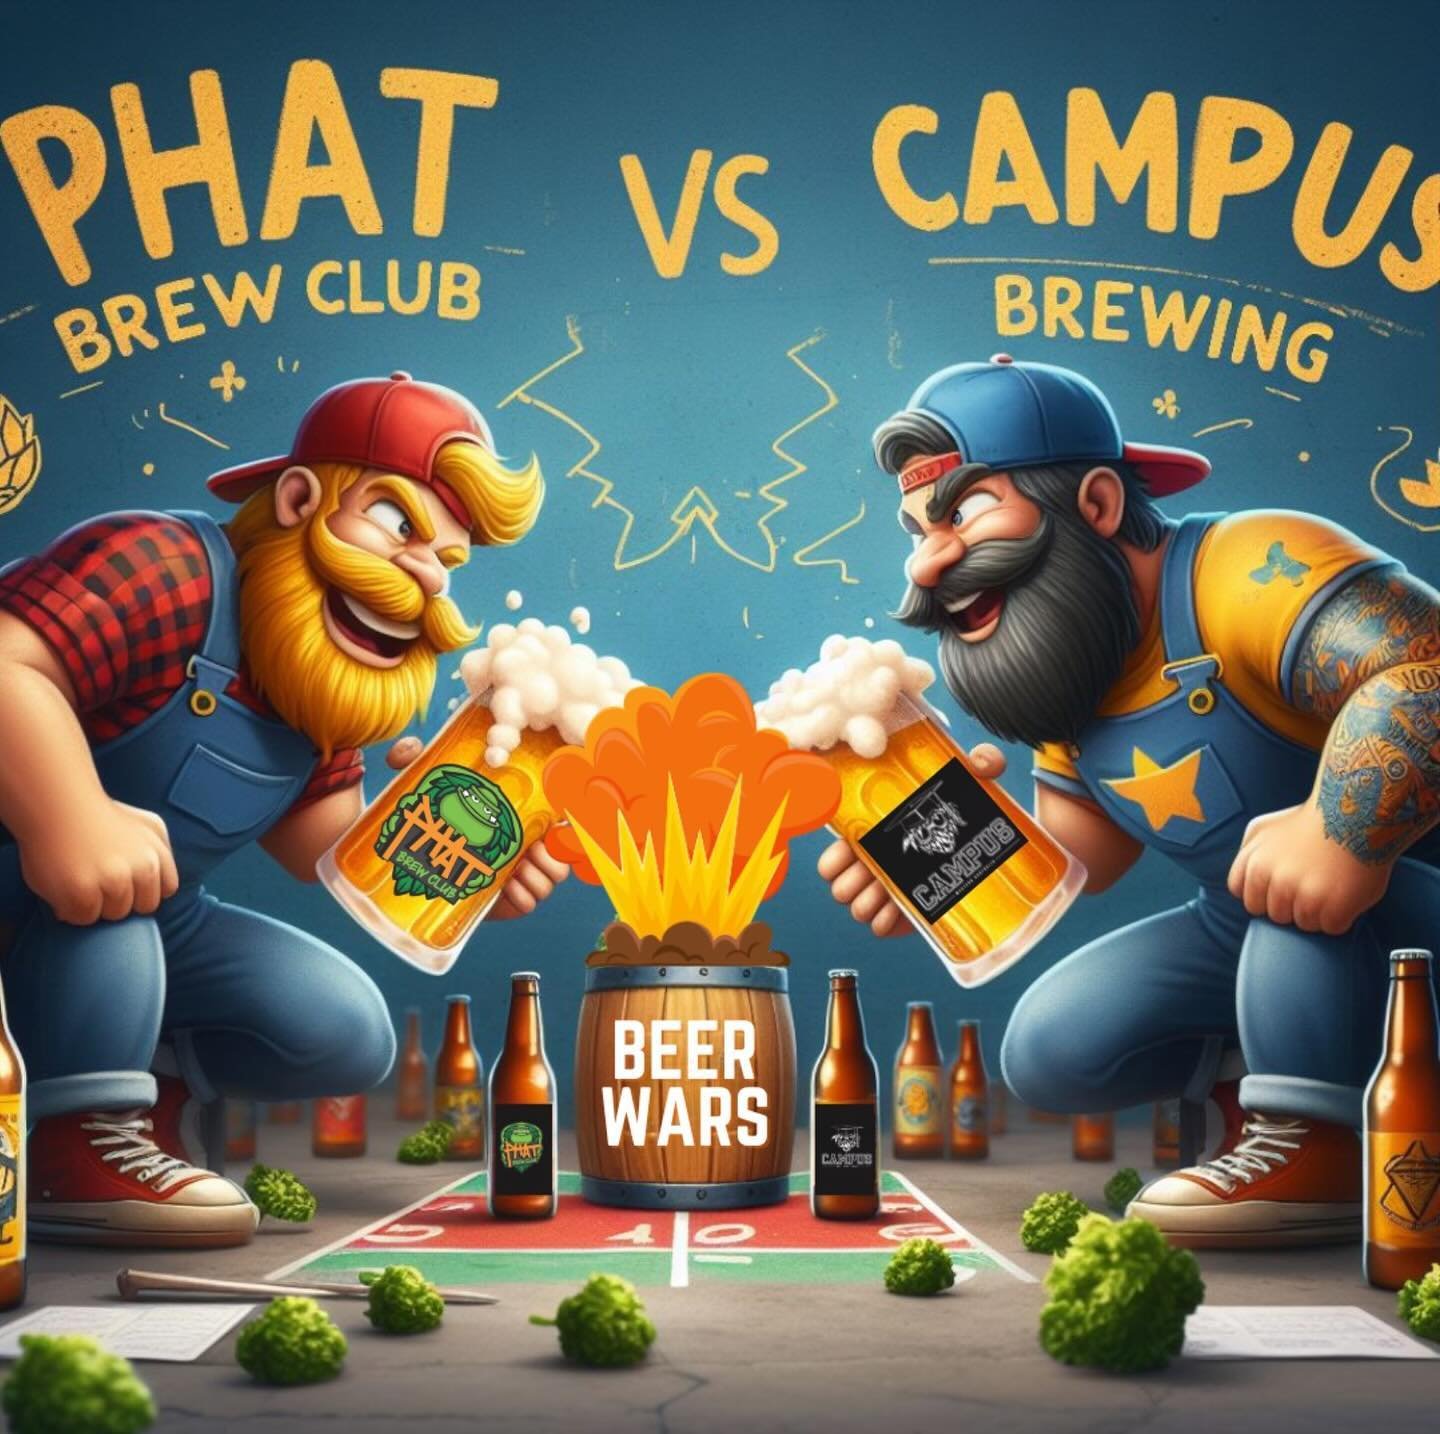 @phatbrewclub vs @campusbrewingwa 
Who brews a better beer? 🍻 
Only one way to settle this score. Both breweries are going head to head in the ultimate Beer War, each brewing a new beer &amp; letting the fine people of Froth Town decide. 👯
THIS FRI